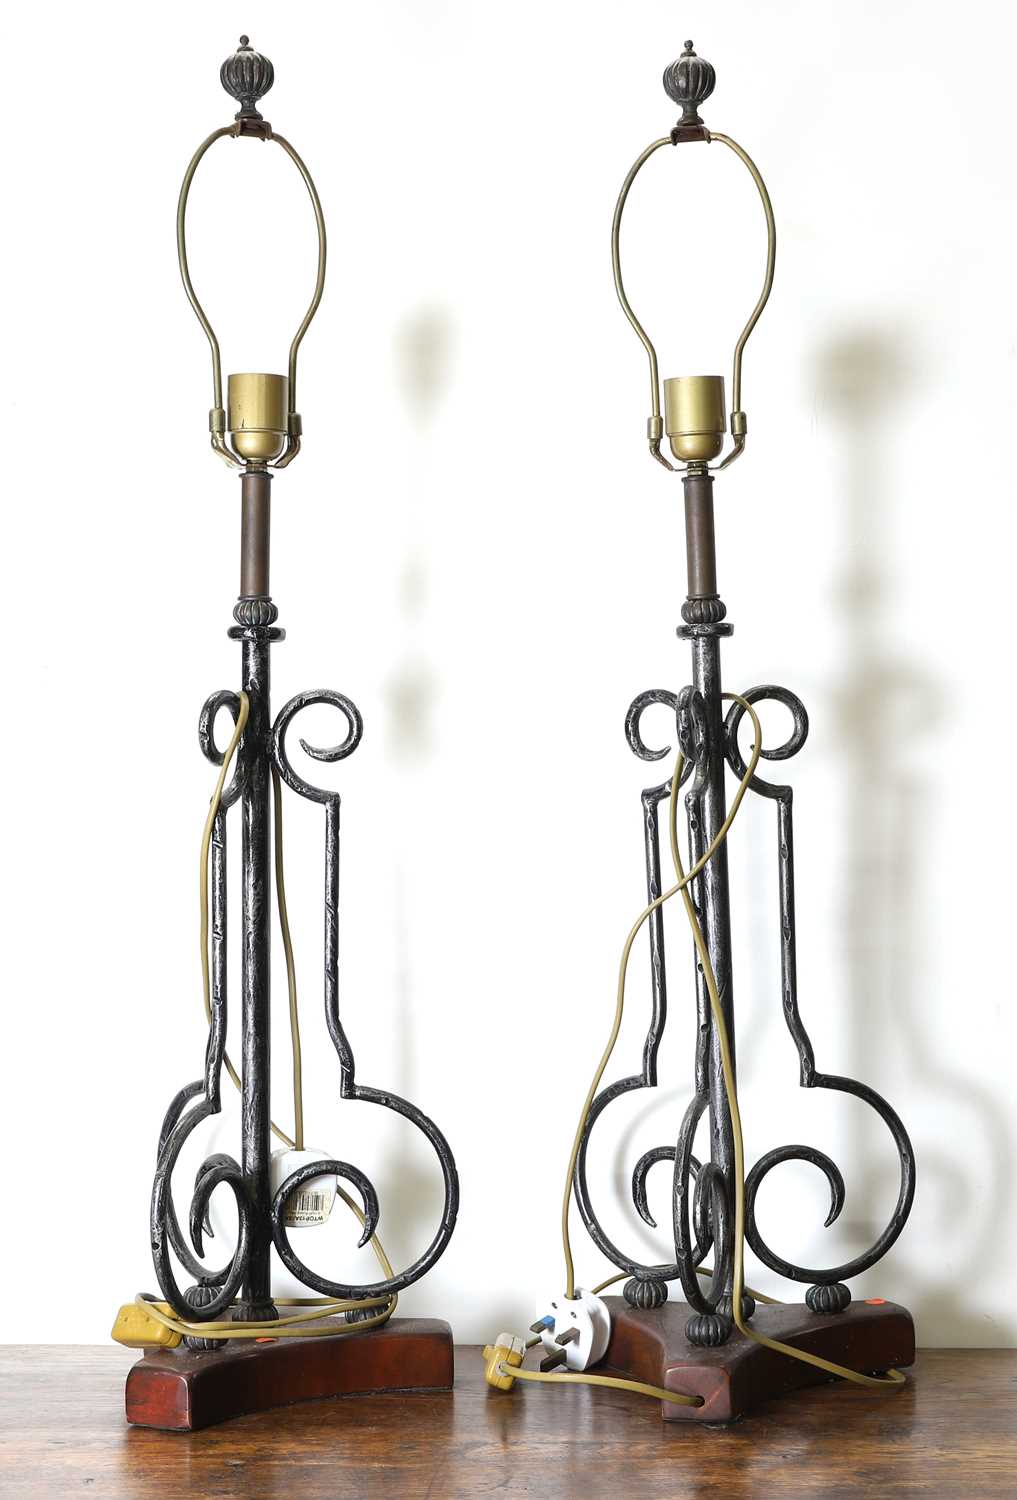 A wrought and cast metal four-arm candle wall sconce, - Image 3 of 5